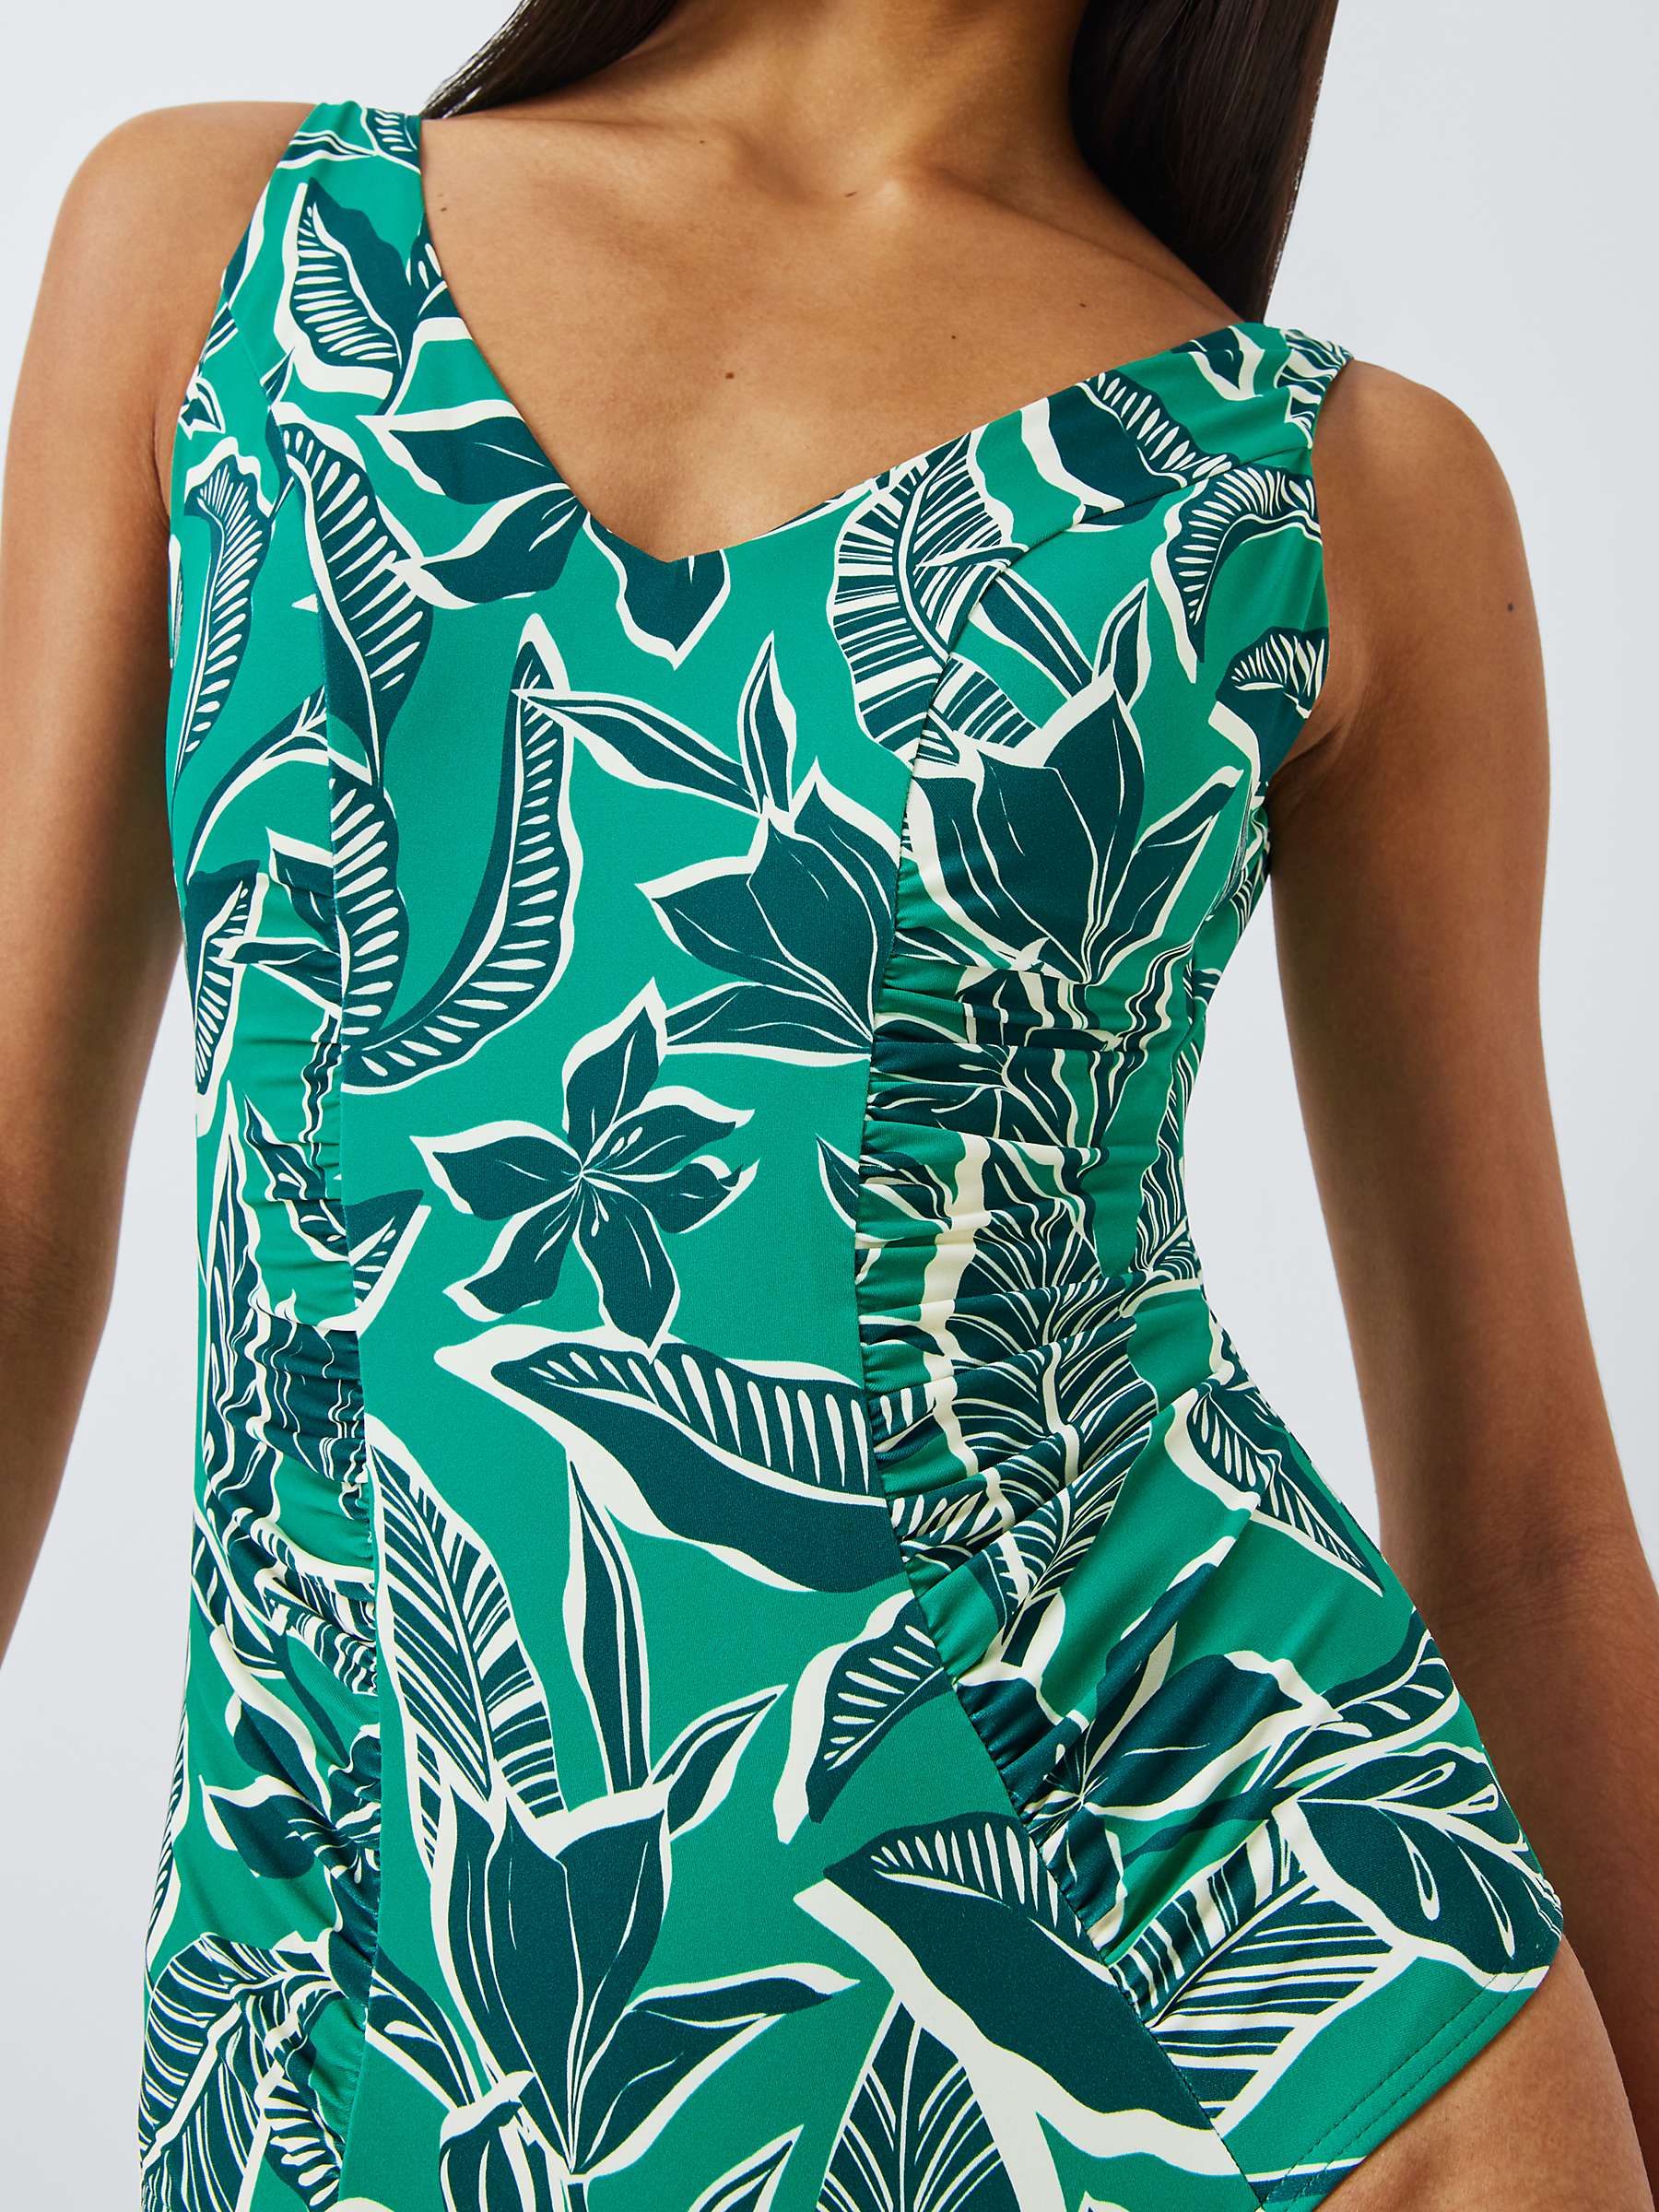 Buy John Lewis Ayanna Ruched Tummy Control Swimsuit, Green Online at johnlewis.com